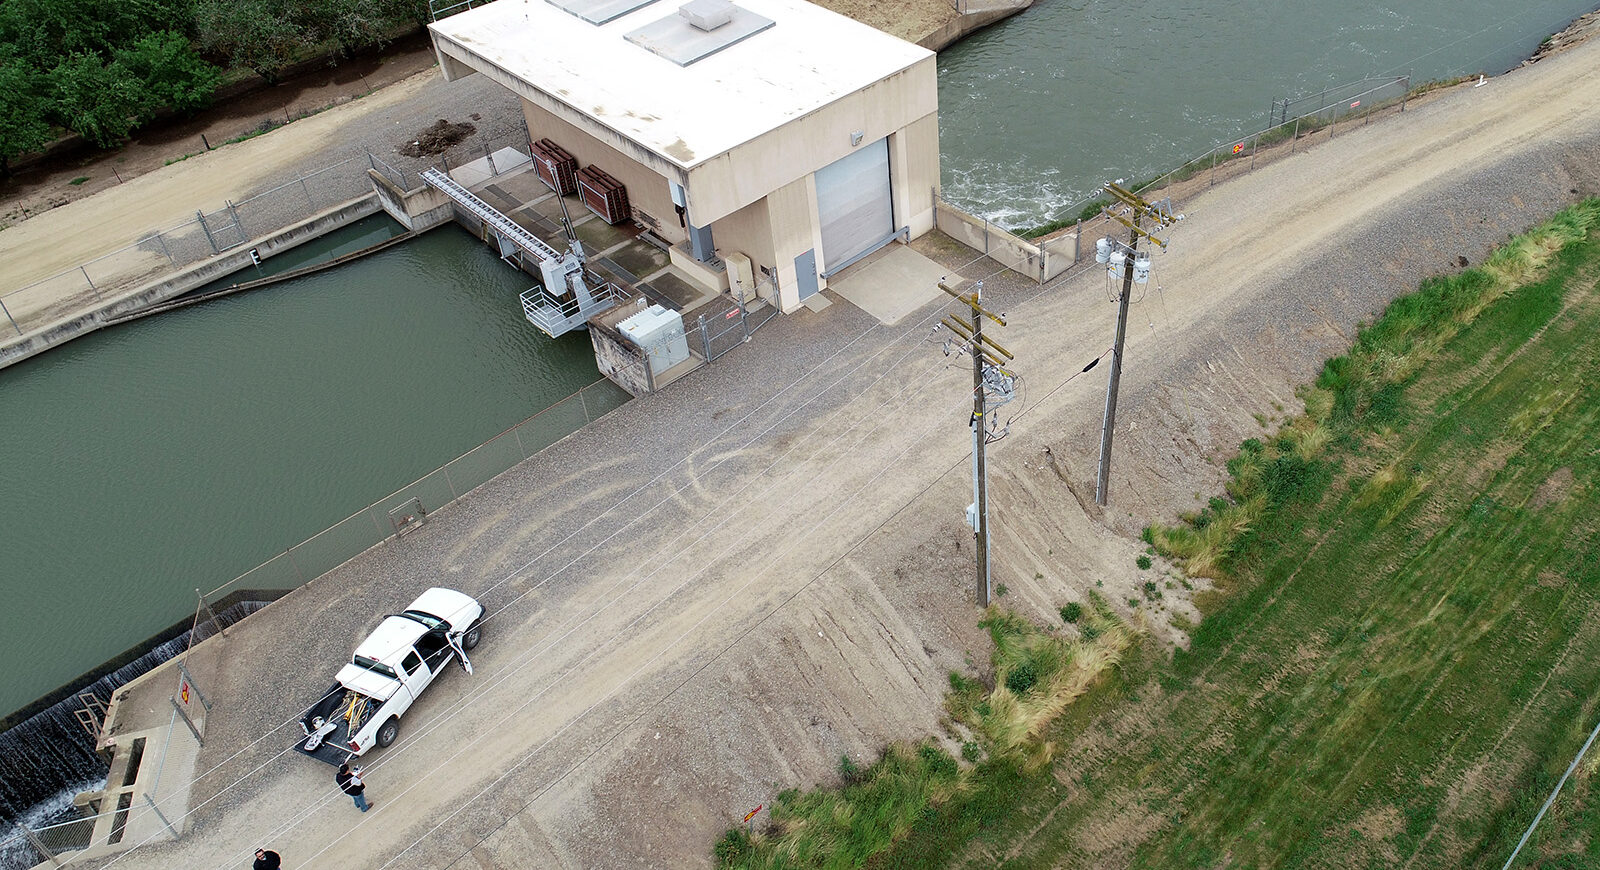 Overhead picture of small hydroelectric plant